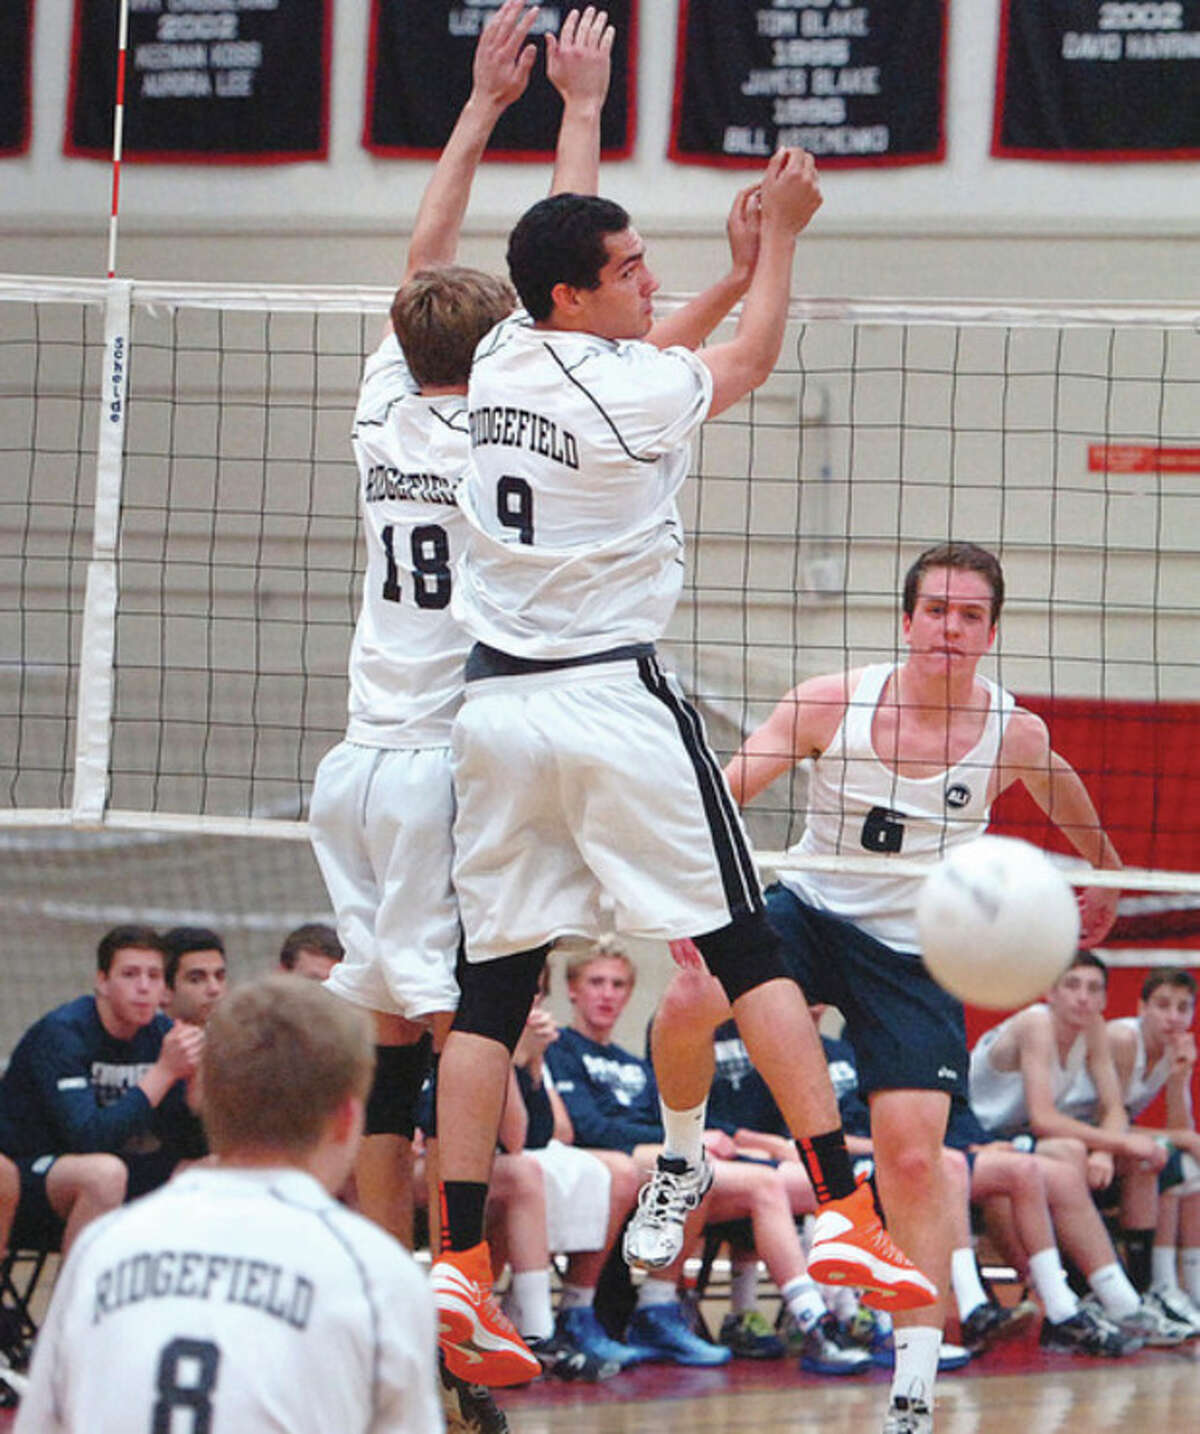 Hour photo/Alex von Kleydorff Ryan Petyerson of Staples, right, pounds home a point past Ridgefield's Tyler Chittenden (18) and Griffin Jones during Tuesday's CIAC Class L volleyball state semifinal match. A 3-0 win put Staples in Friday's final.